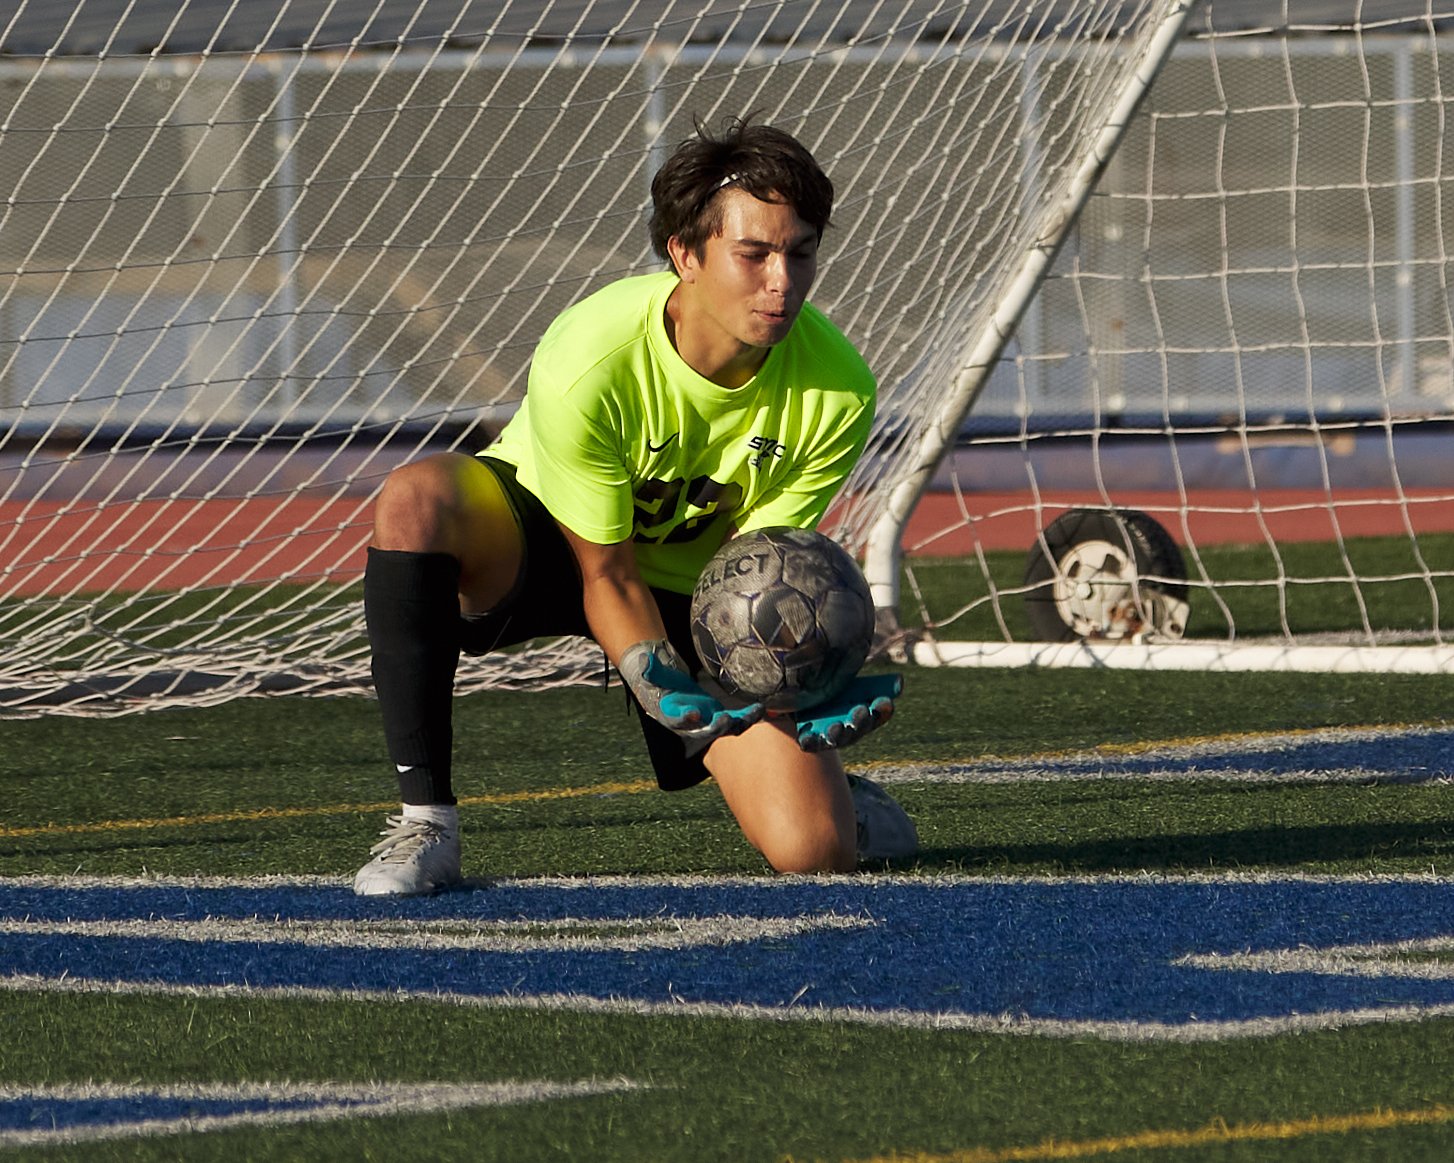  Santa Monica College Corsairs' goalie Cesar Gomez catches the ball during the men's soccer match against the Oxnard College Condors on Tuesday, Oct. 18, 2022, at Corsair Field in Santa Monica, Calif. The Corsairs lost 0-3. (Nicholas McCall | The Cor